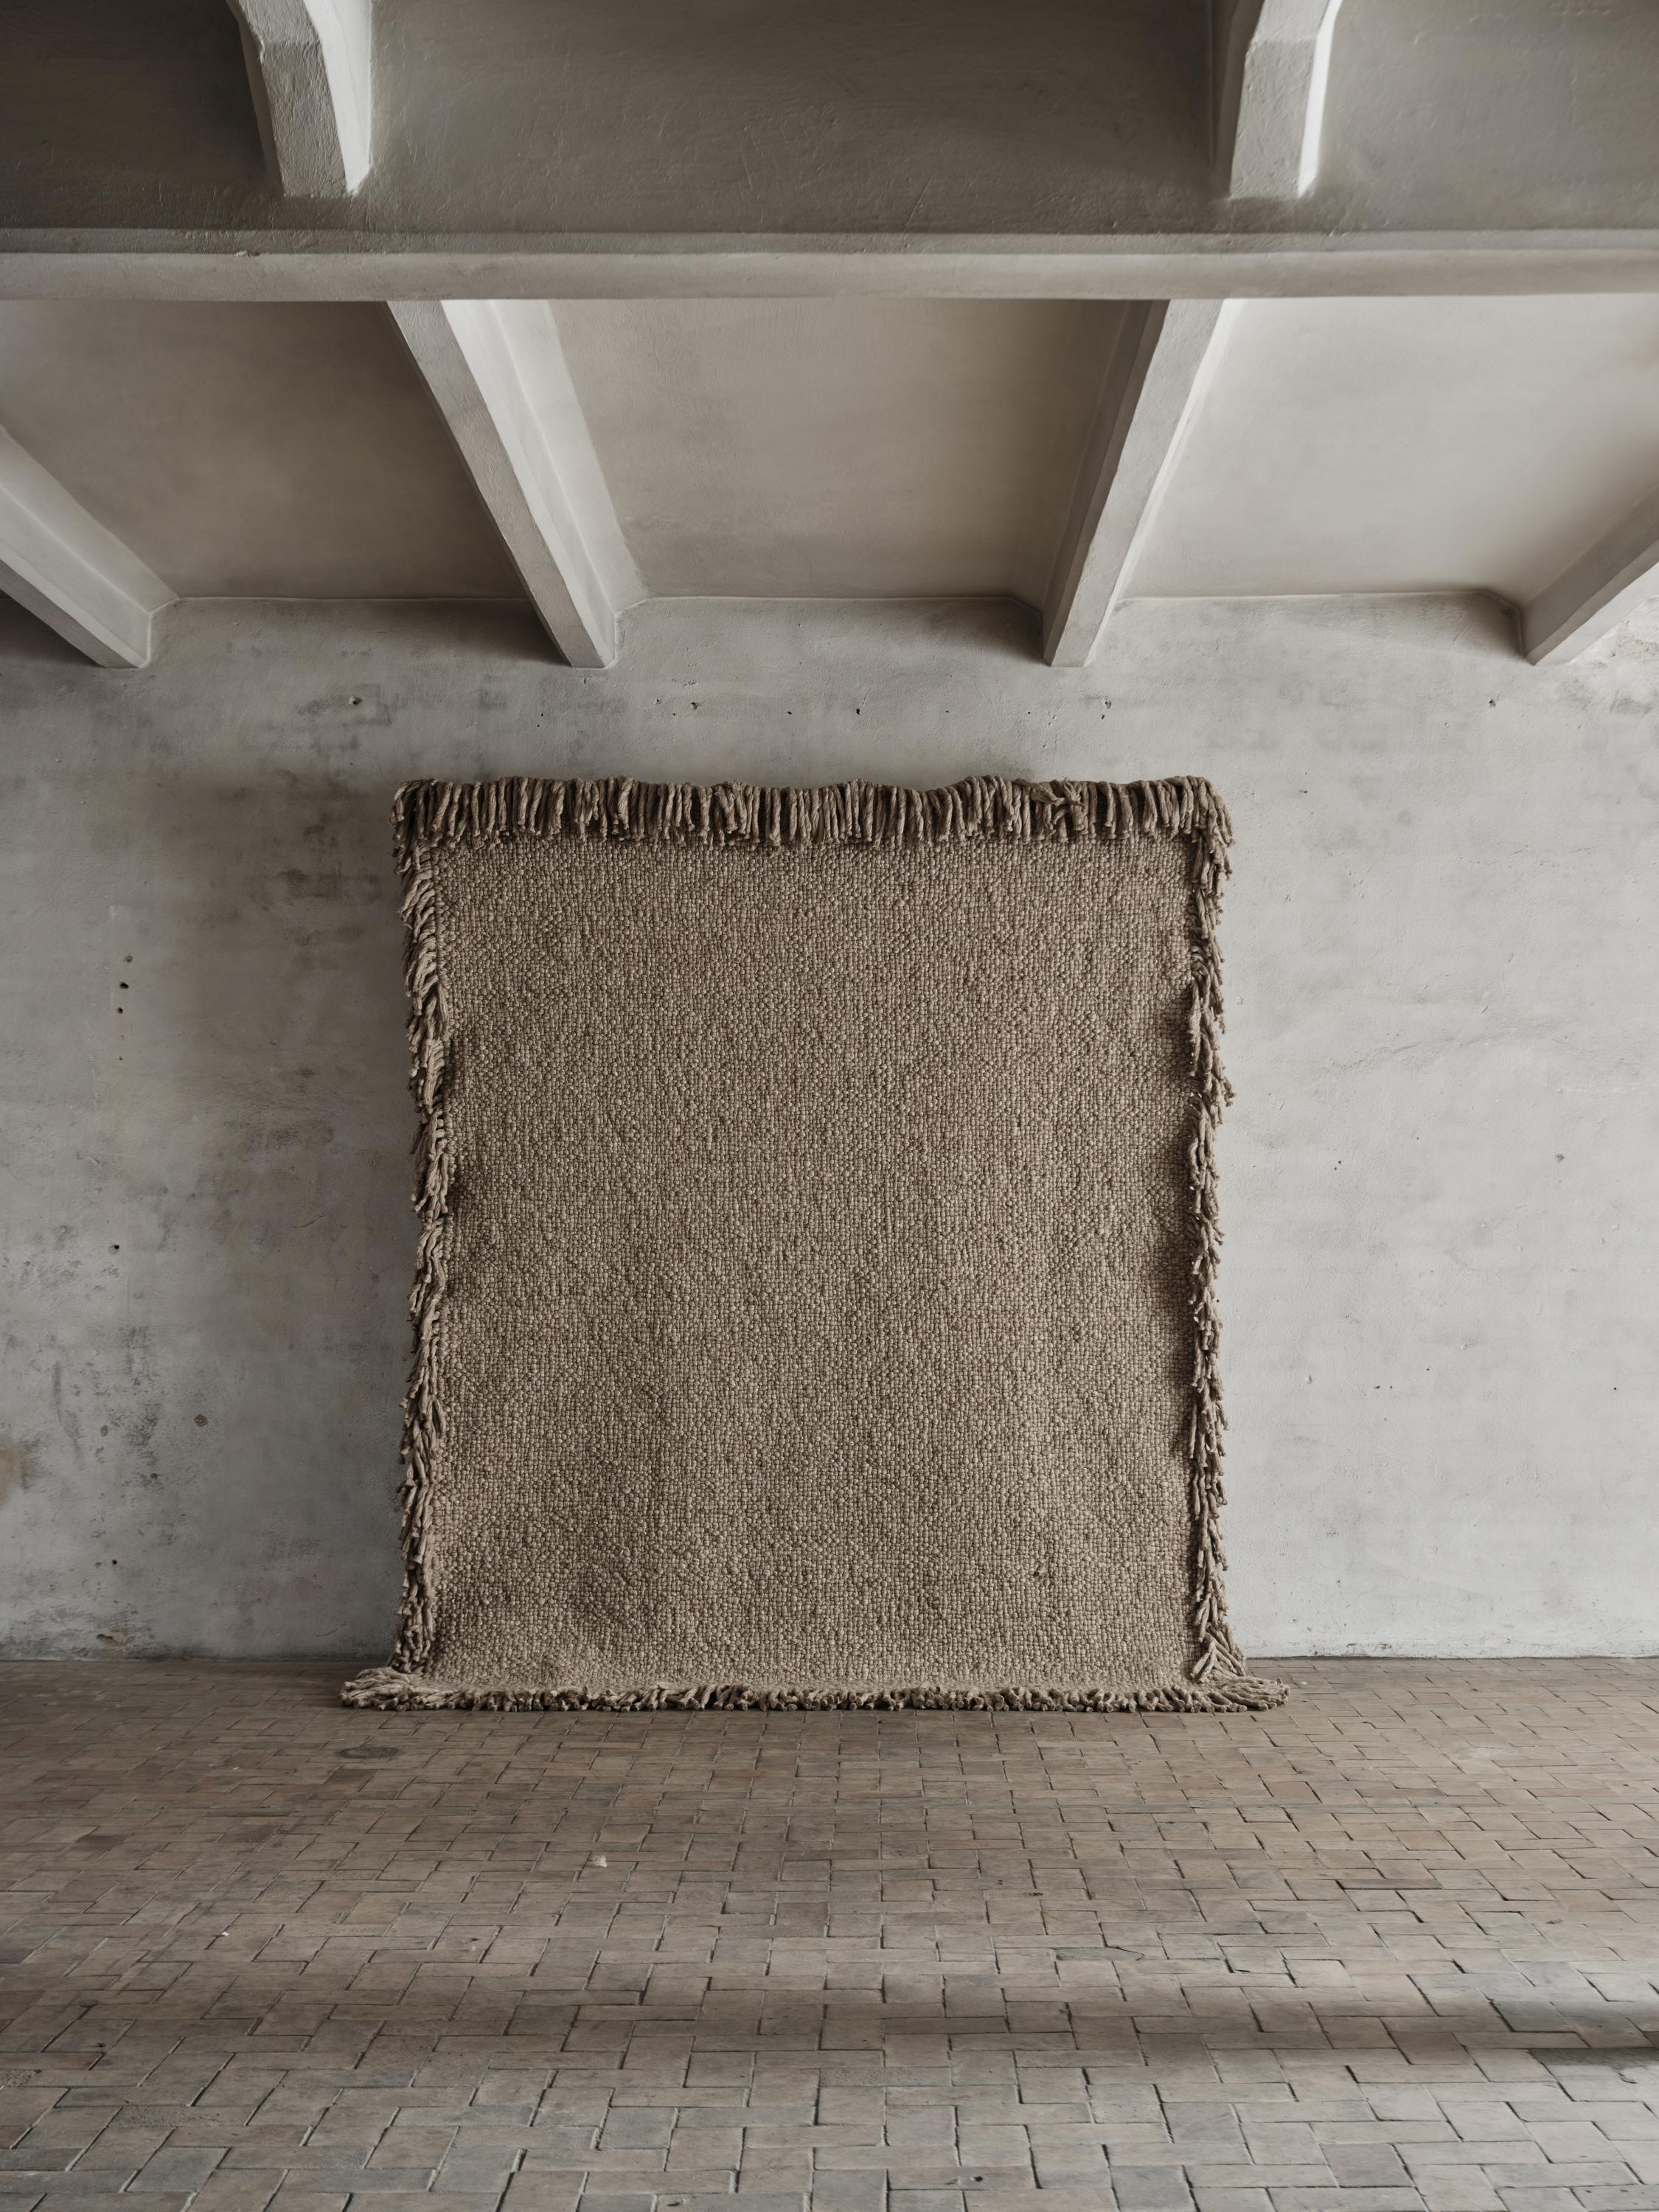 No.11 Rug by Cappelen Dimyr
Dimensions: D240 x H320 cm
Materials: 100% wool 

no.11 is a heavy, compact and rustic rug in luxury chunky wool woven in a classic basket weave construction. The bold and over-dimensioned yarn runs through the entire